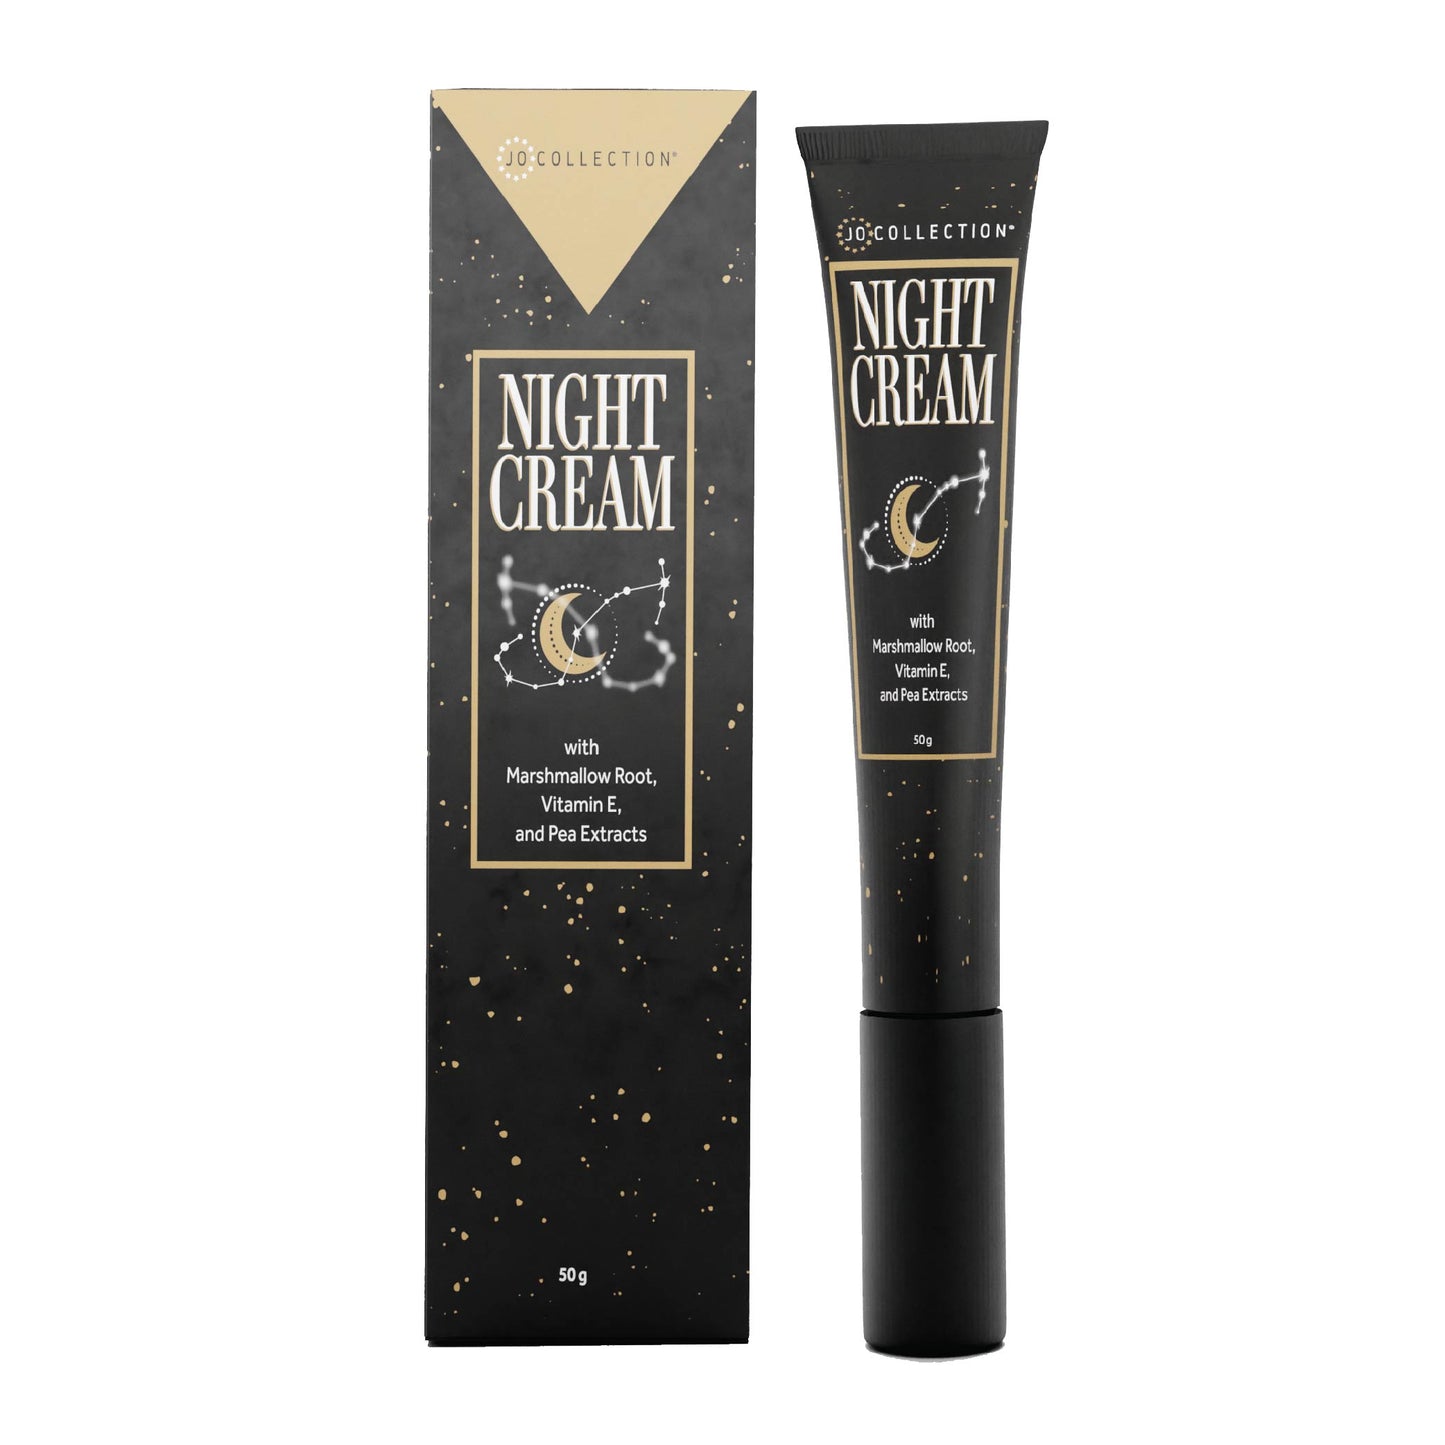 Night Cream with Marshmallow Root, Vitamin E, and Pea Extracts